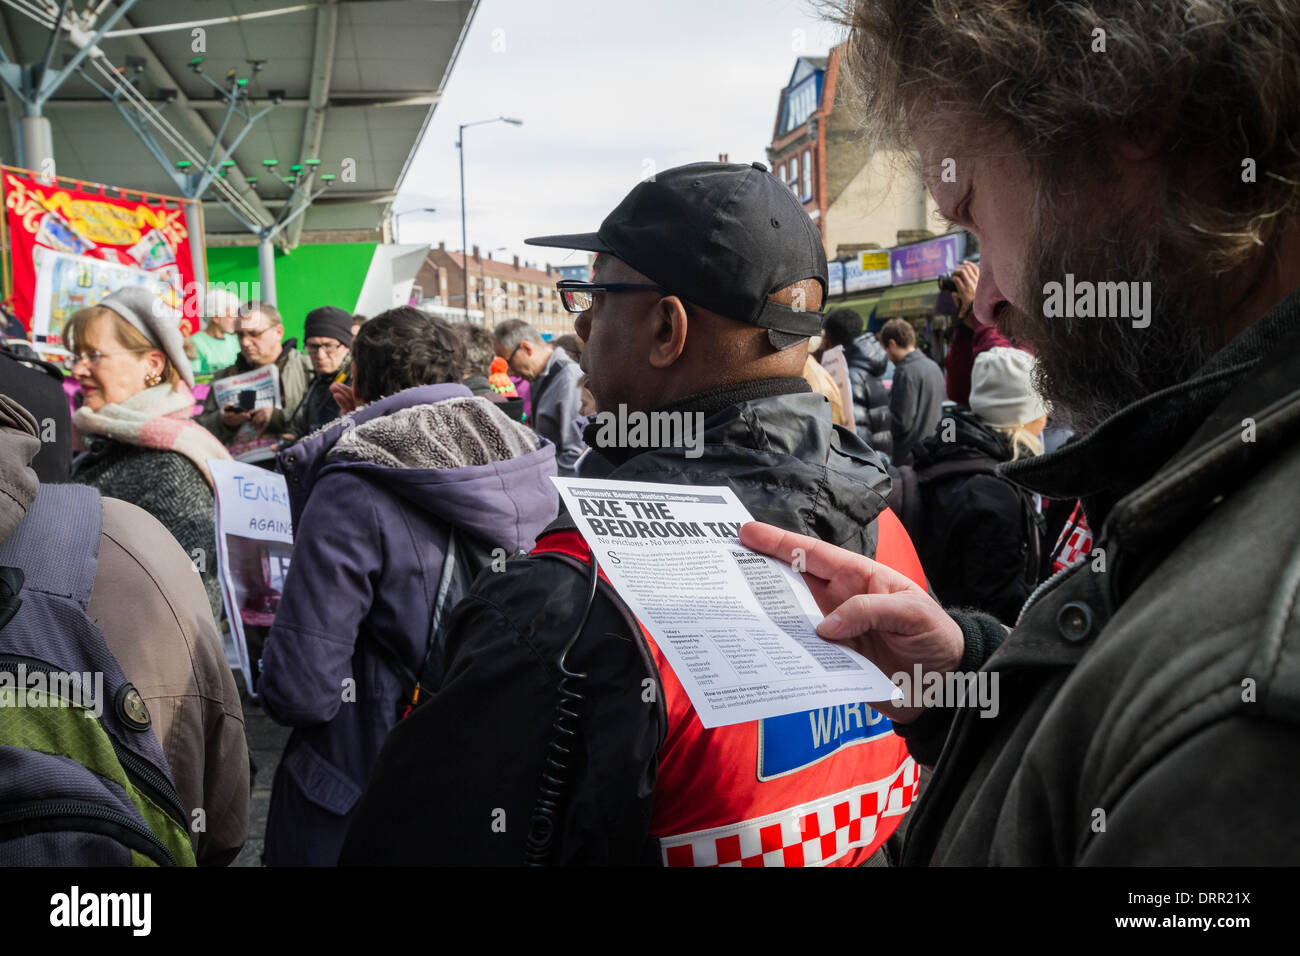 'Axe the Bedroom Tax - No Evictions' Protest march and rally in Peckham, London, UK Stock Photo